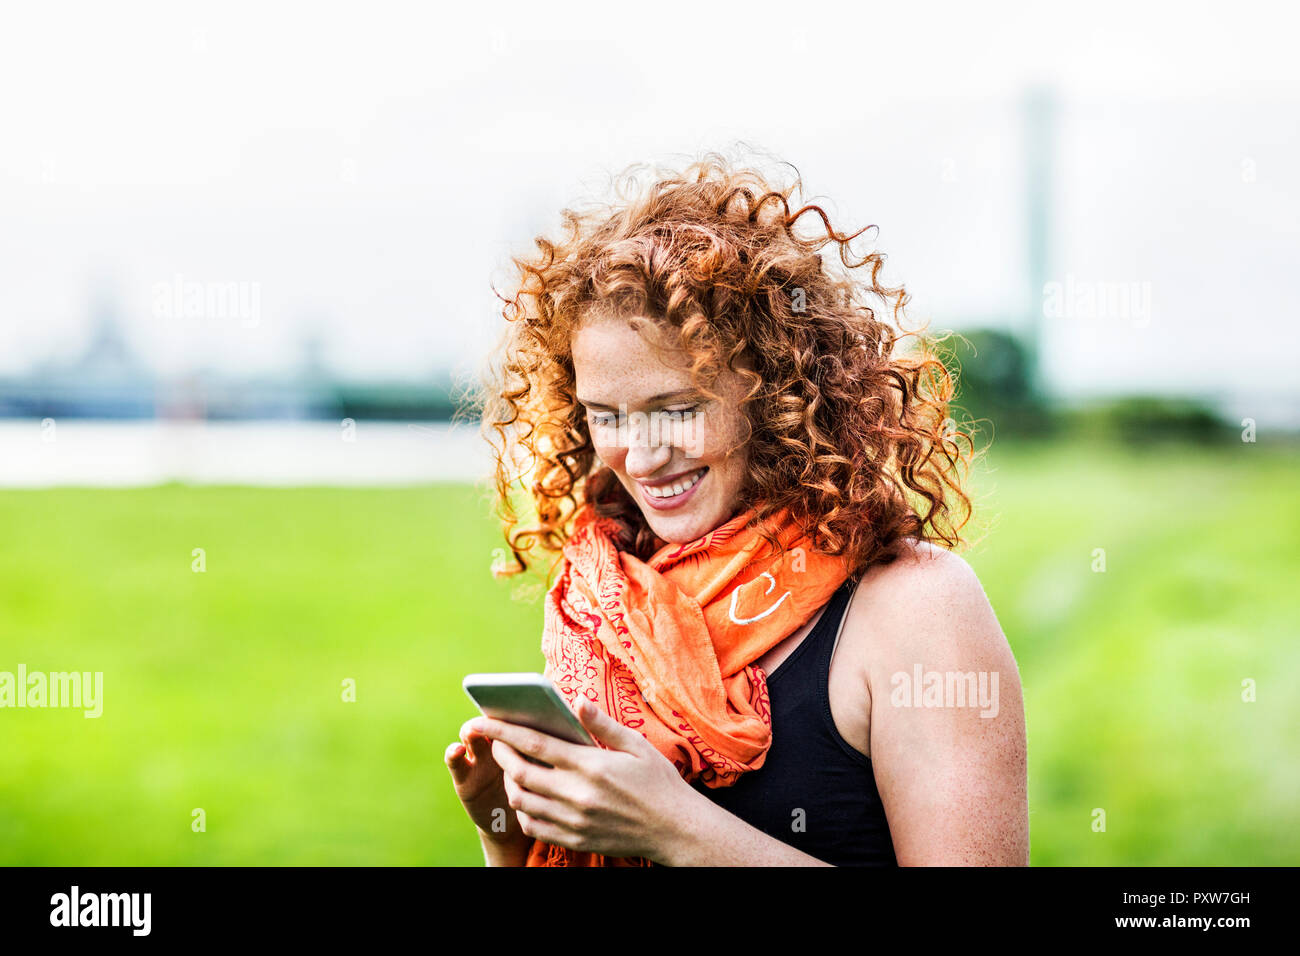 Portrait of happy young woman with curly red hair looking at cell phone Stock Photo